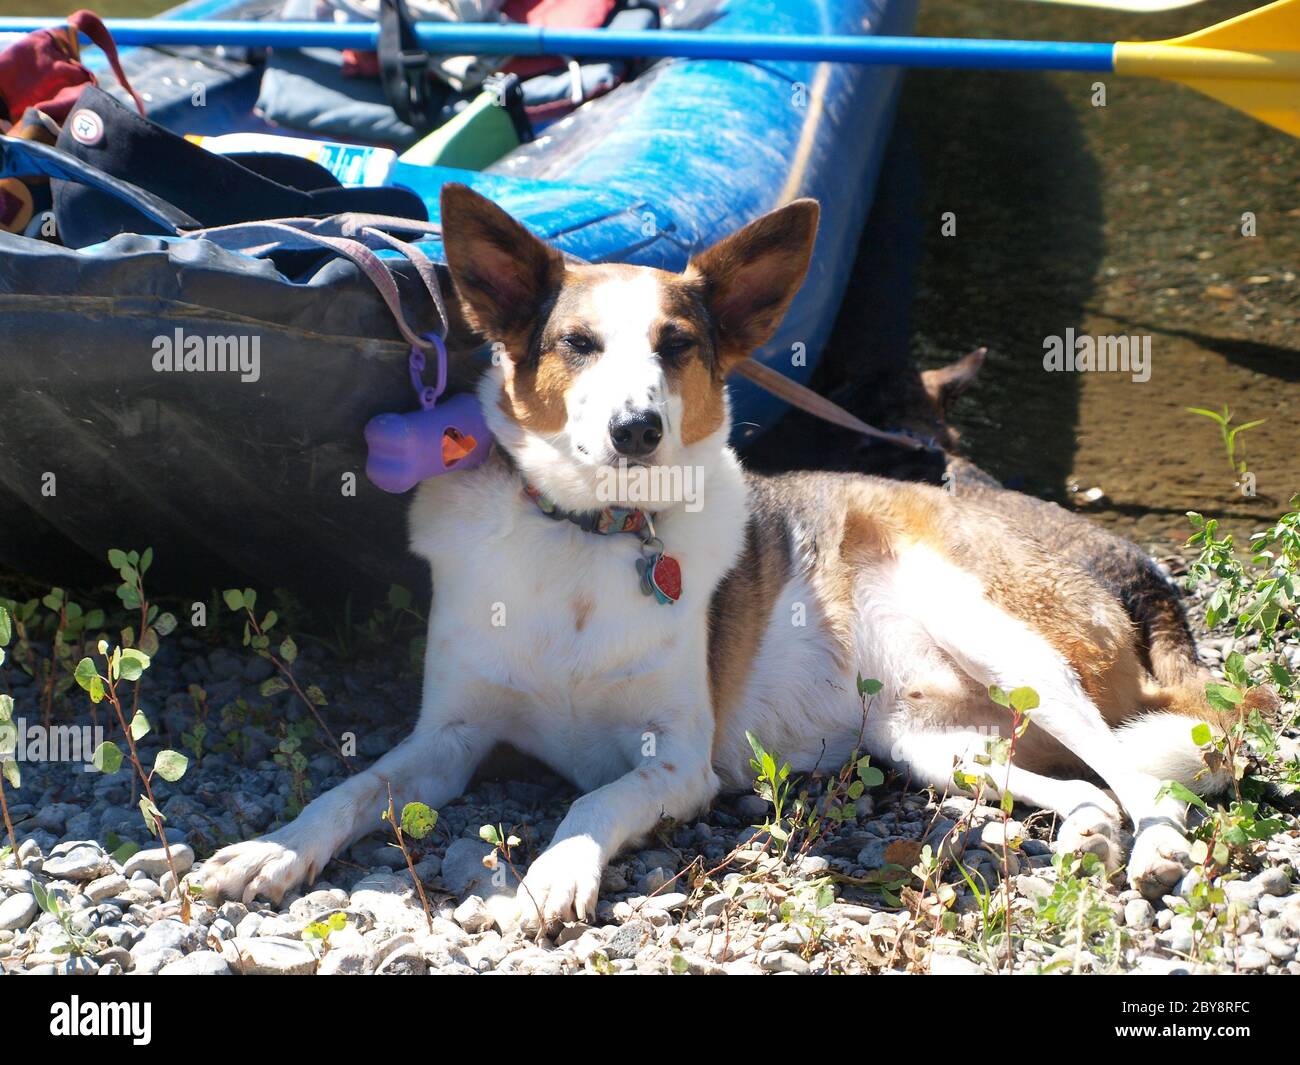 Dog relaxes on river rafting trip Stock Photo